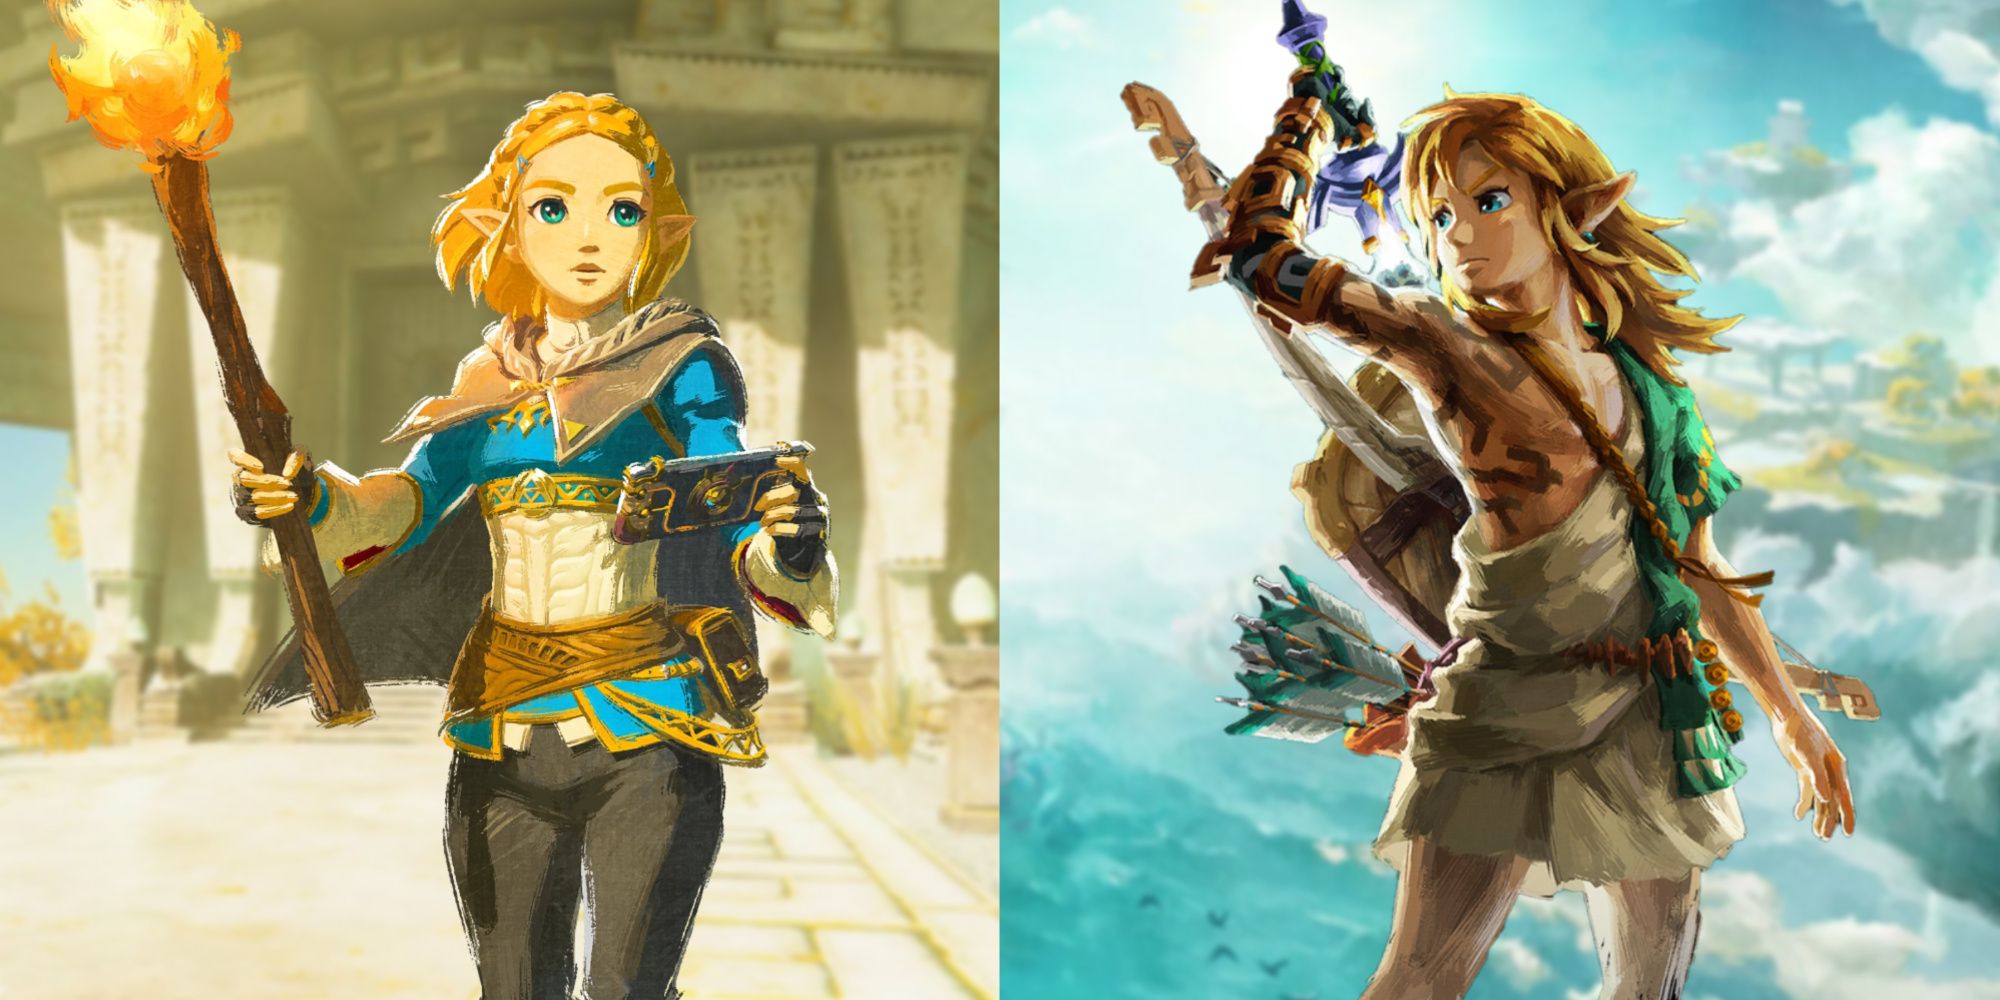 Zelda and Link as they appear in key artwork for Tears of the Kingdom